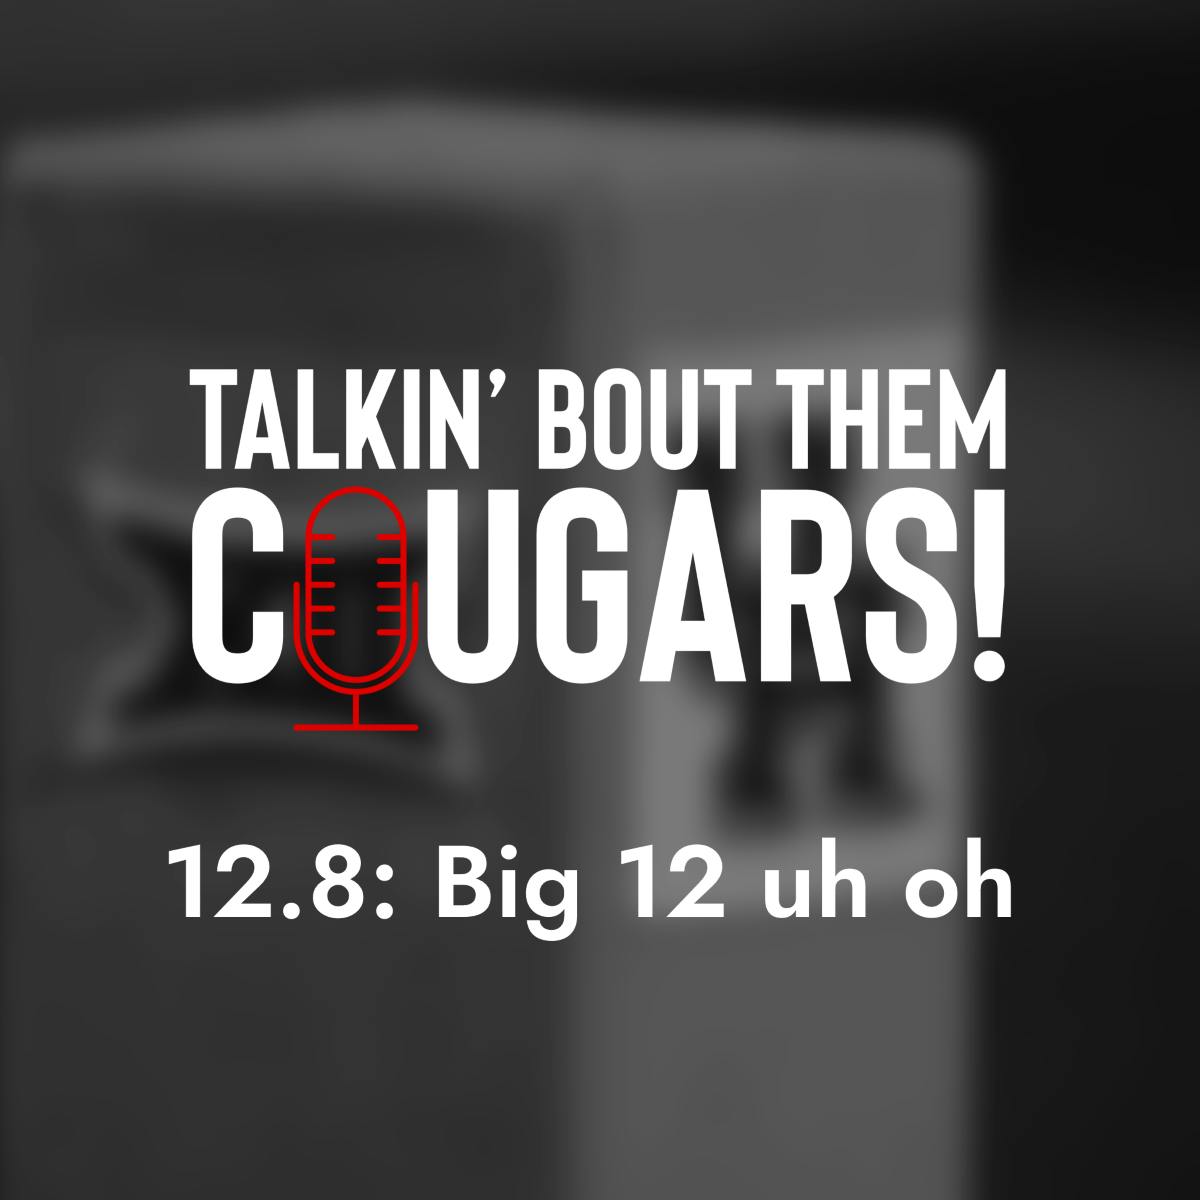 TALKIN' BOUT THEM COUGARS: Big 12 uh oh